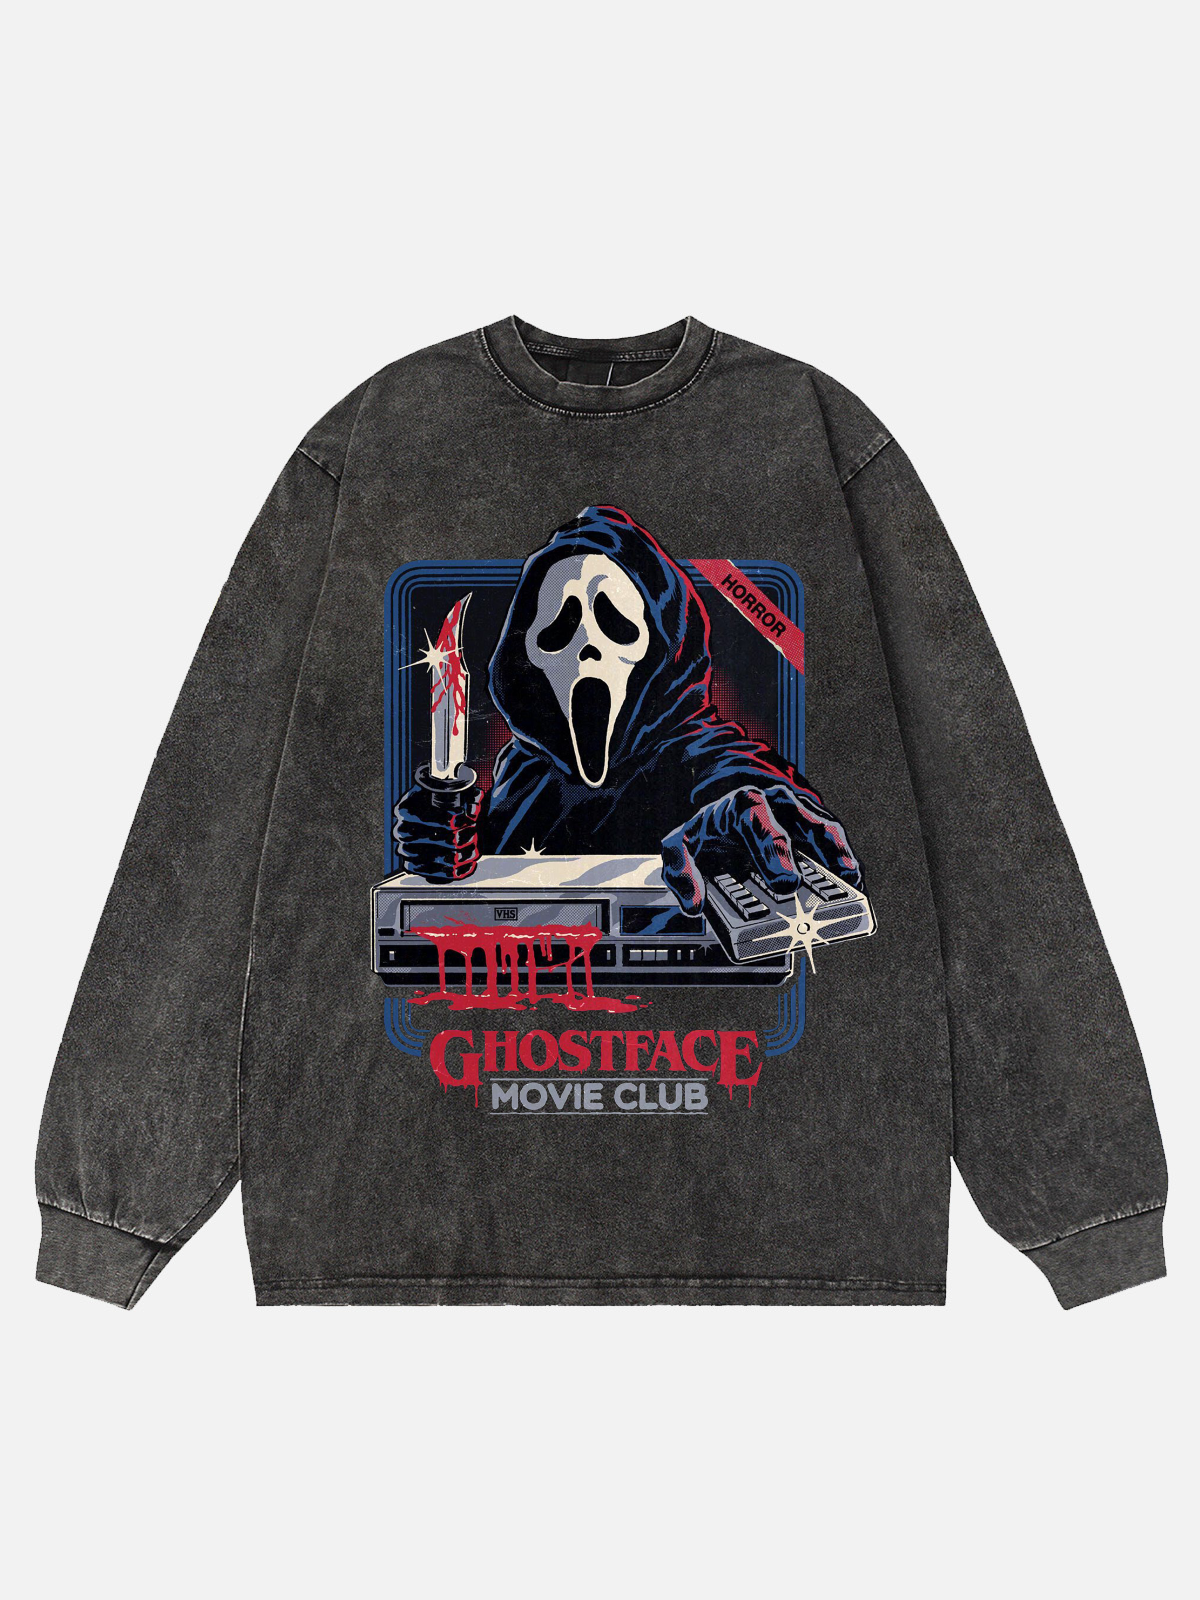 Ghostface Movie Club Print Washed Cotton Long Sleeve T-Shirt